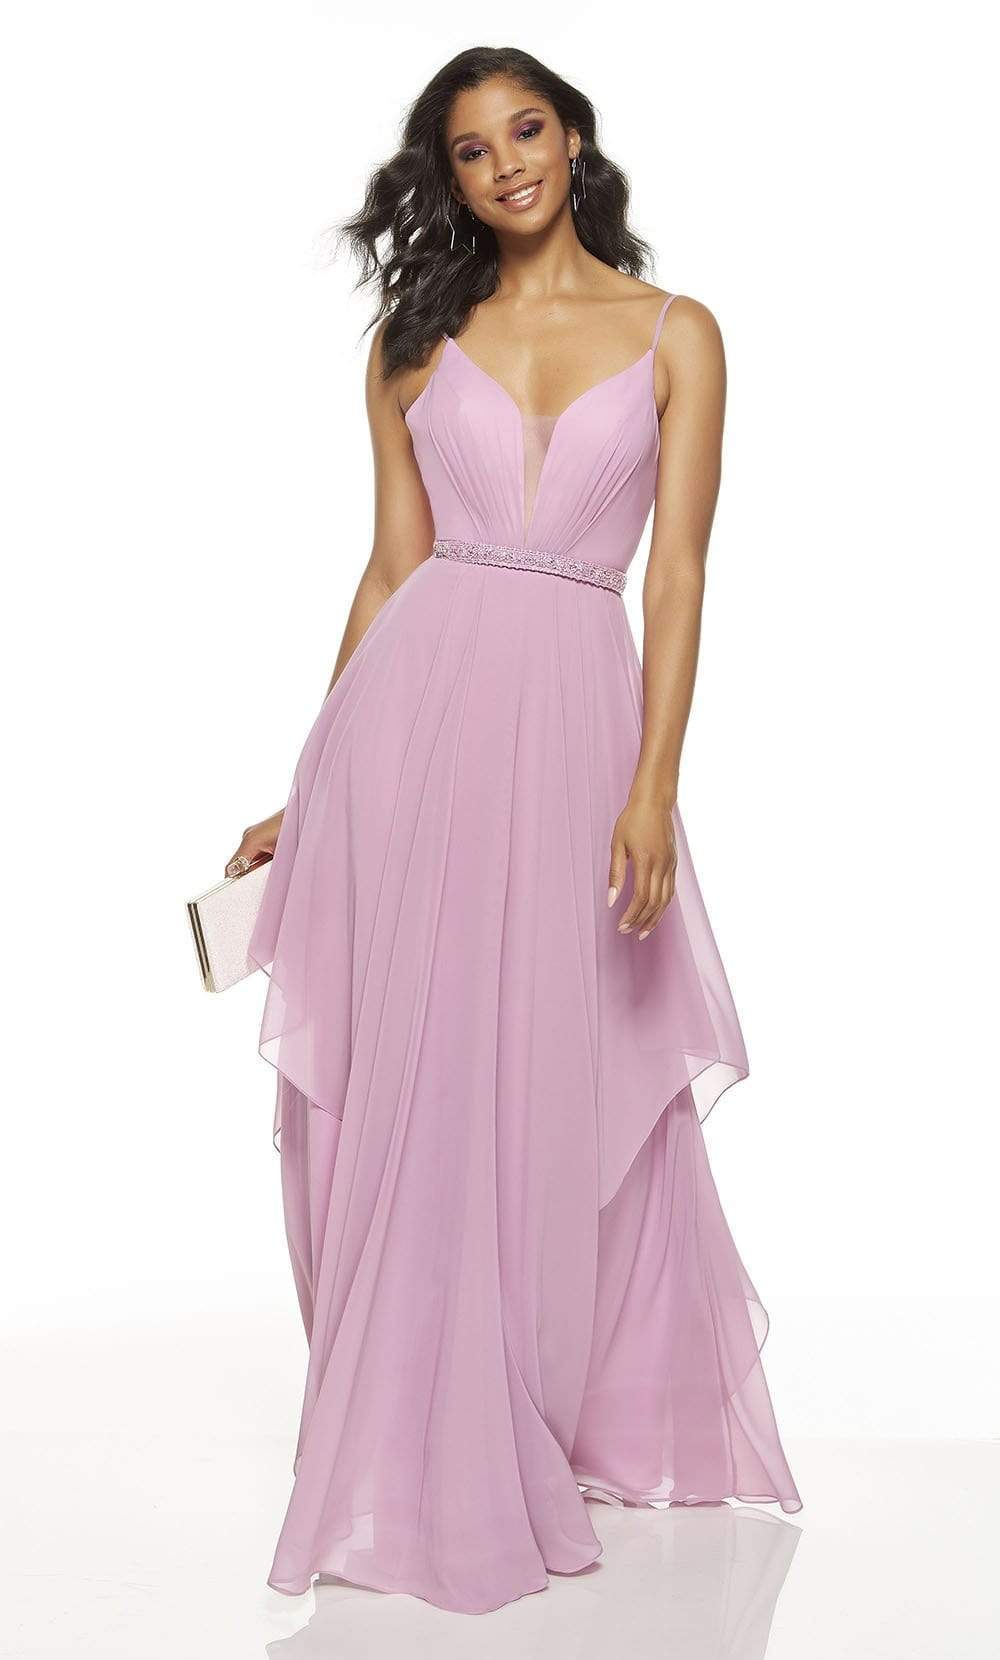 Alyce Paris - 60640 Plunging V-Neck Layered A-Line Dress Prom Dresses 0 / Light Orchid